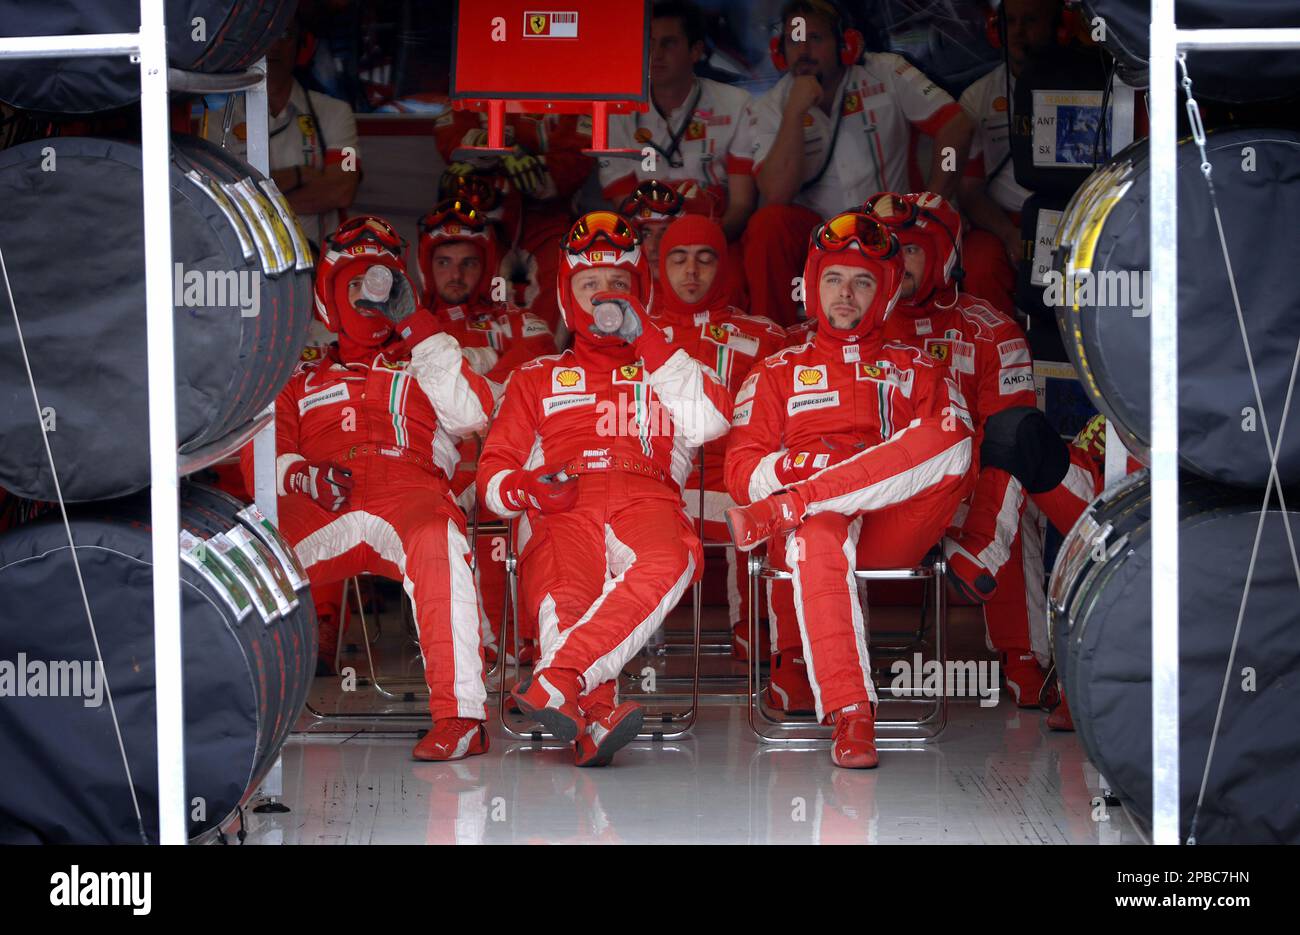 Ferrari mechanics watch the race on a control screen as they sit in their pits during the French Formula One Grand Prix in Magny-Cours, central France, Sunday July 1, 2007.(AP Photo/POOL/Martin Bureau